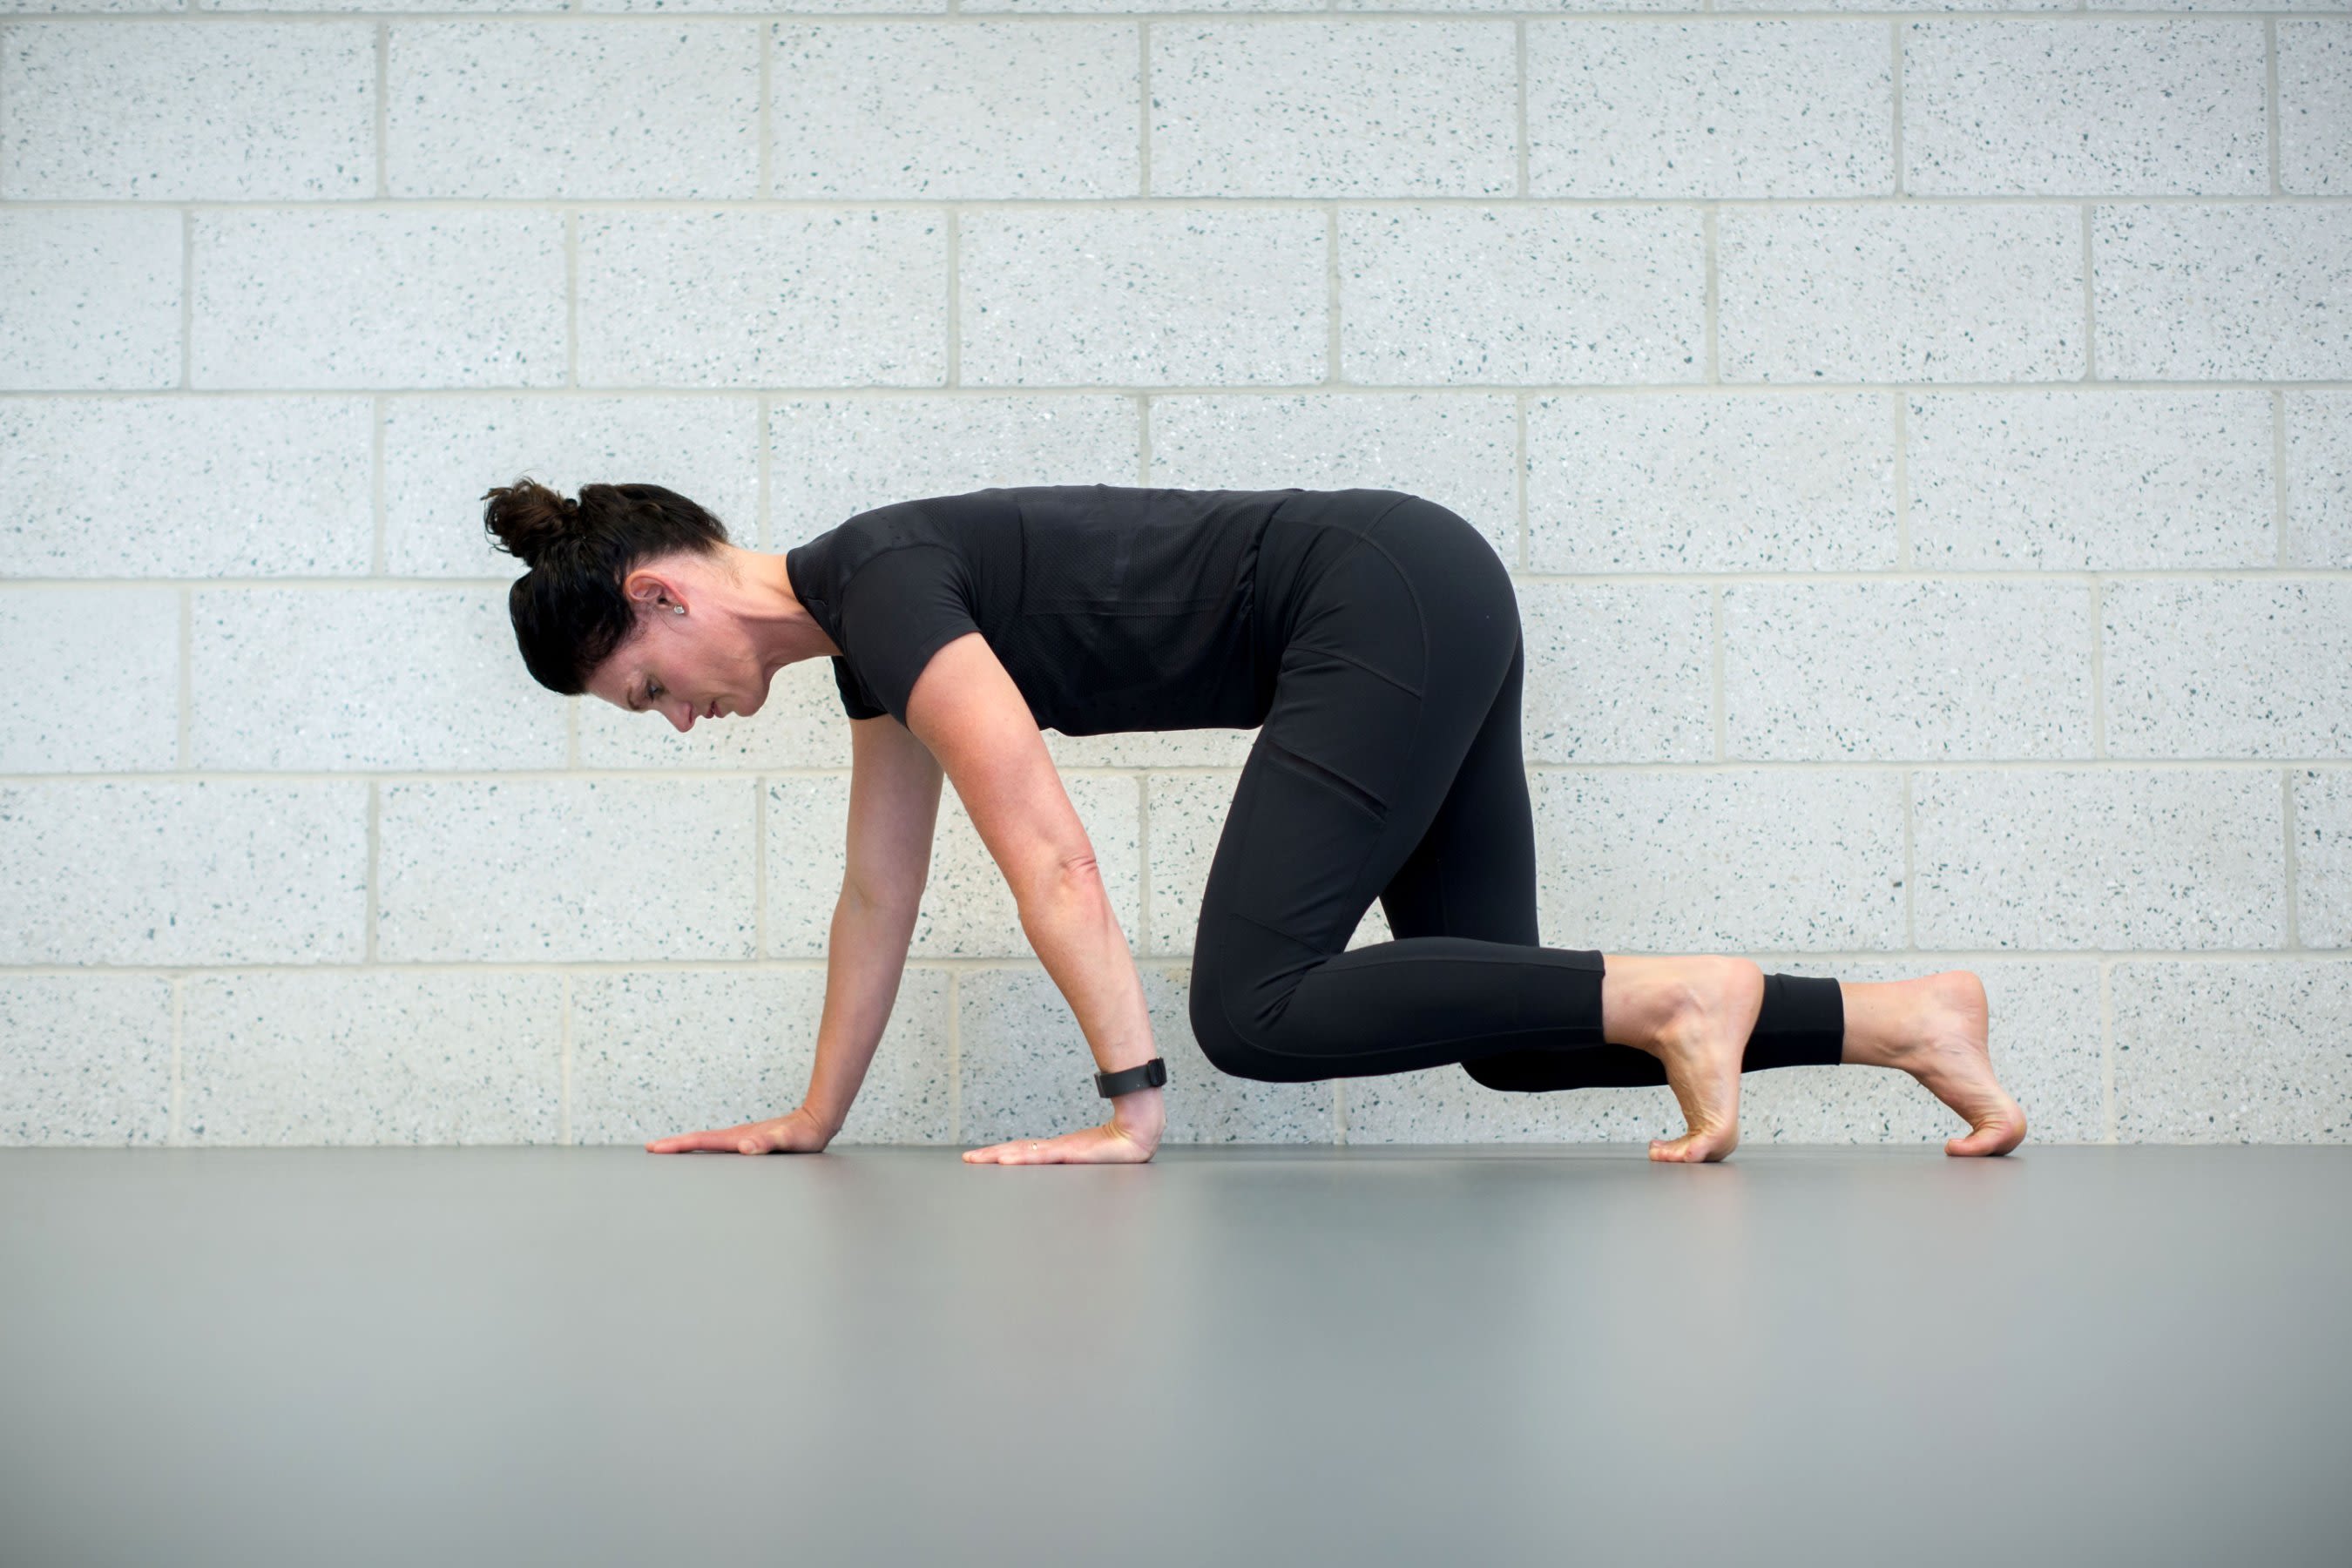 Crawling Exercises For Adults: What Are The Benefits – SWEAT